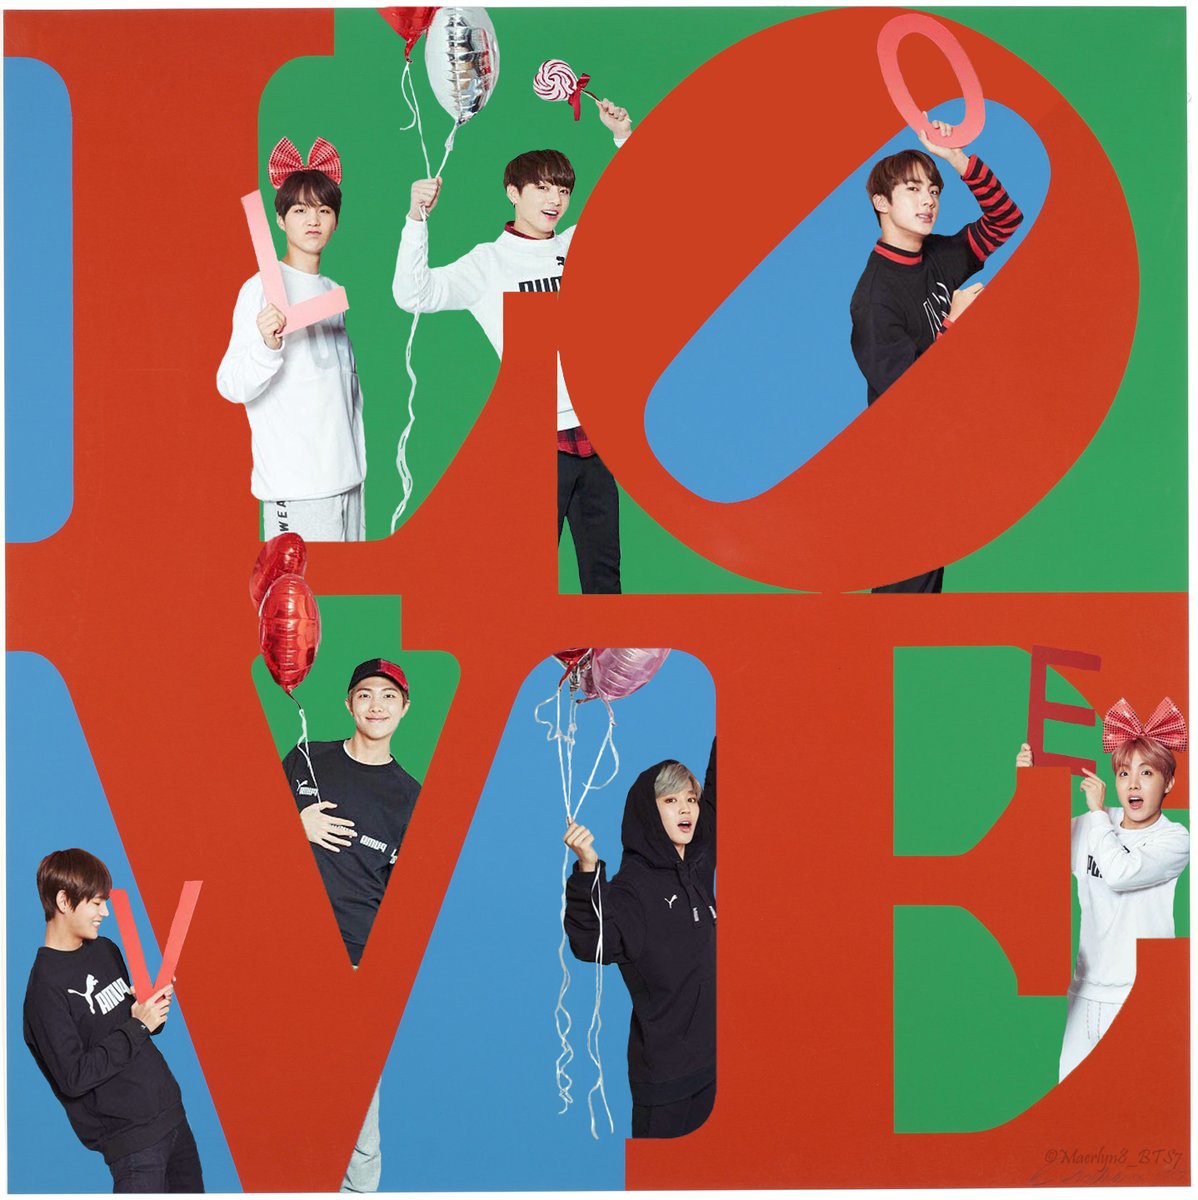 🫶BTS is/in Art - Valentine's Day Edition🫶 Here are some edits to bring a little love to you this Valentine's Day!💘 ART USED: -Heart of Men, Keith Haring (1989) -LOVE, Robert Indiana (1967) #btsisinart #bts #valentinesday @bts_twt ⬇️More Love⬇️